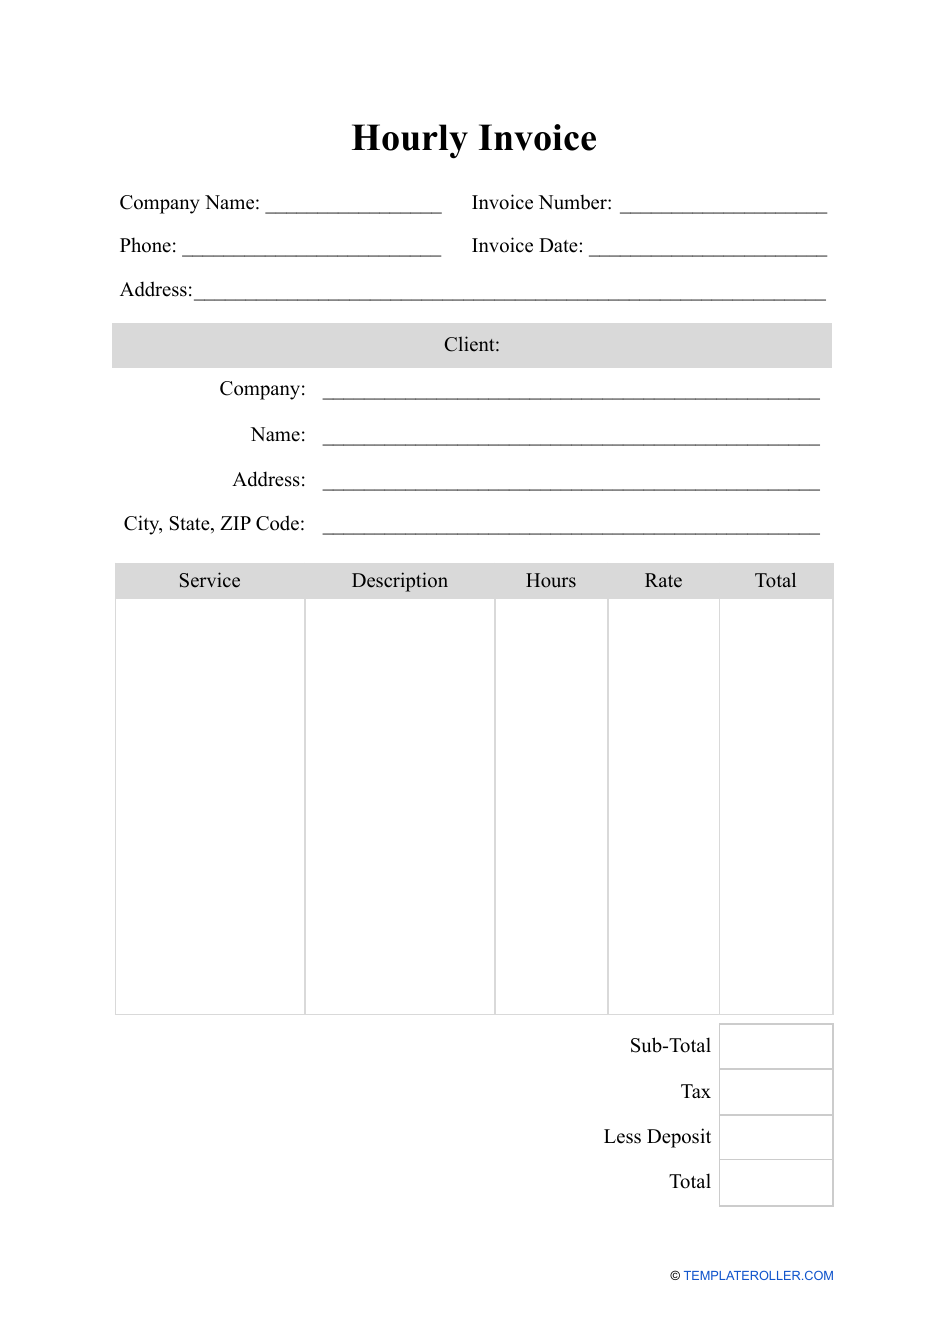 Hourly Invoice Template, Page 1